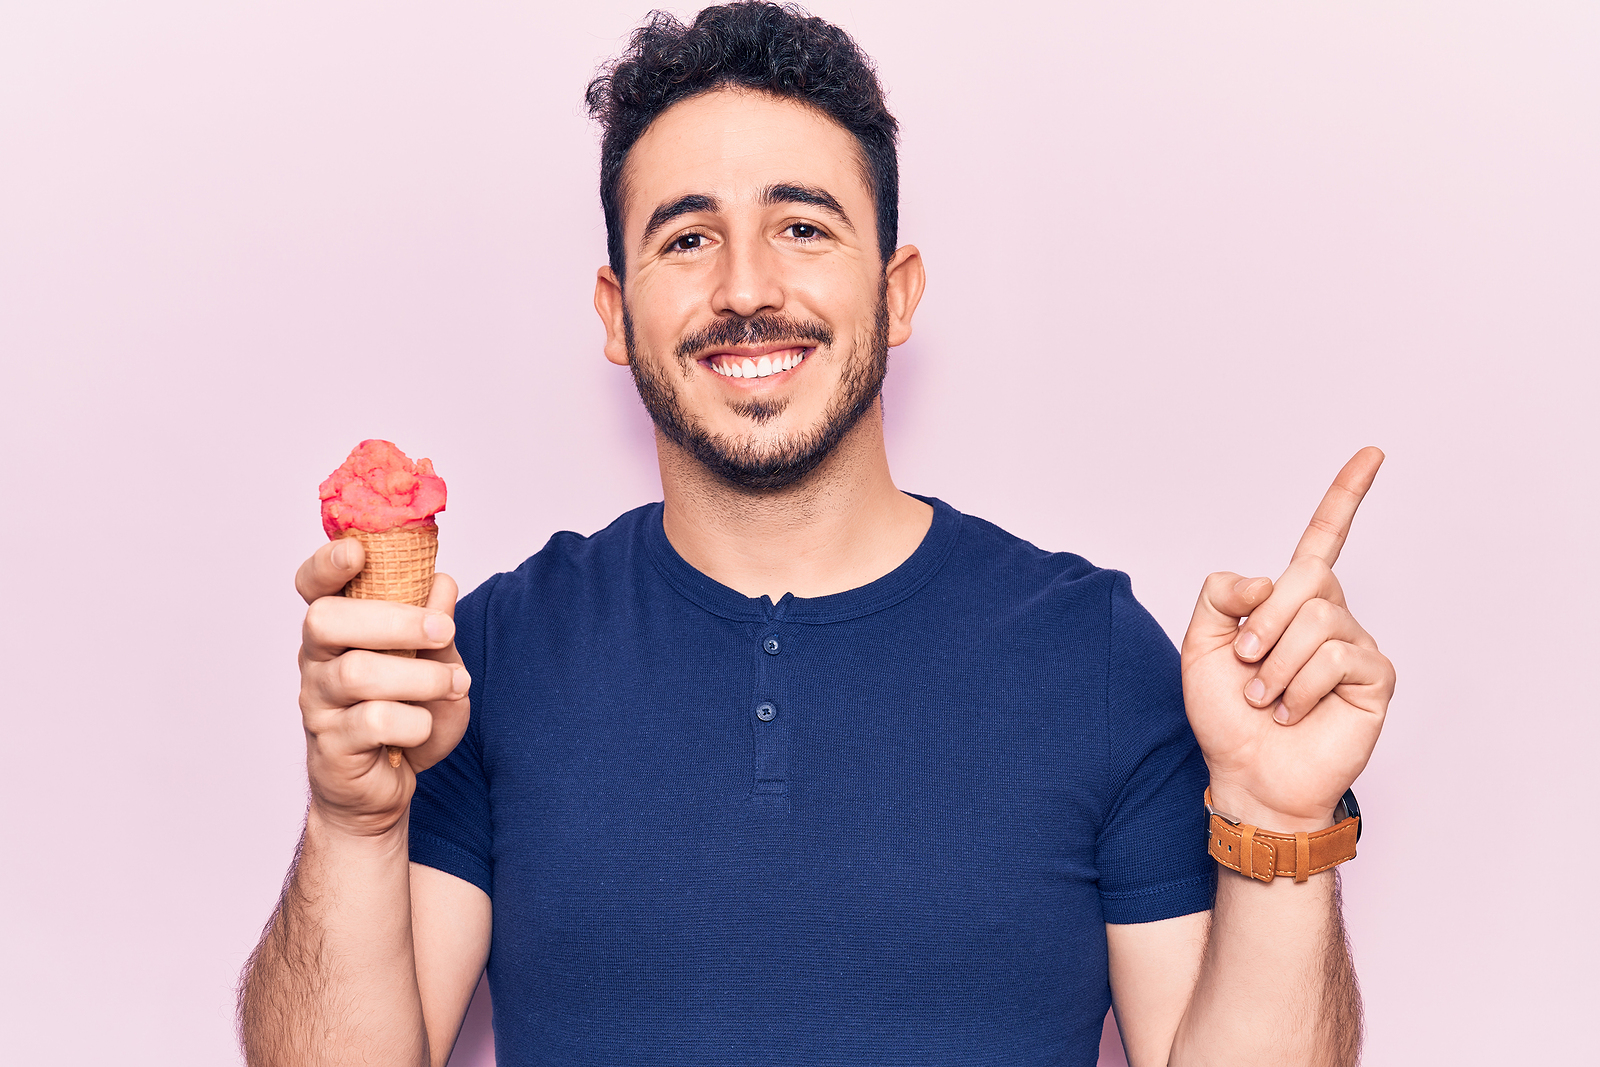 A young attractive man smiles while holding an ice cream cone and pointing to the other direction with his other hand.